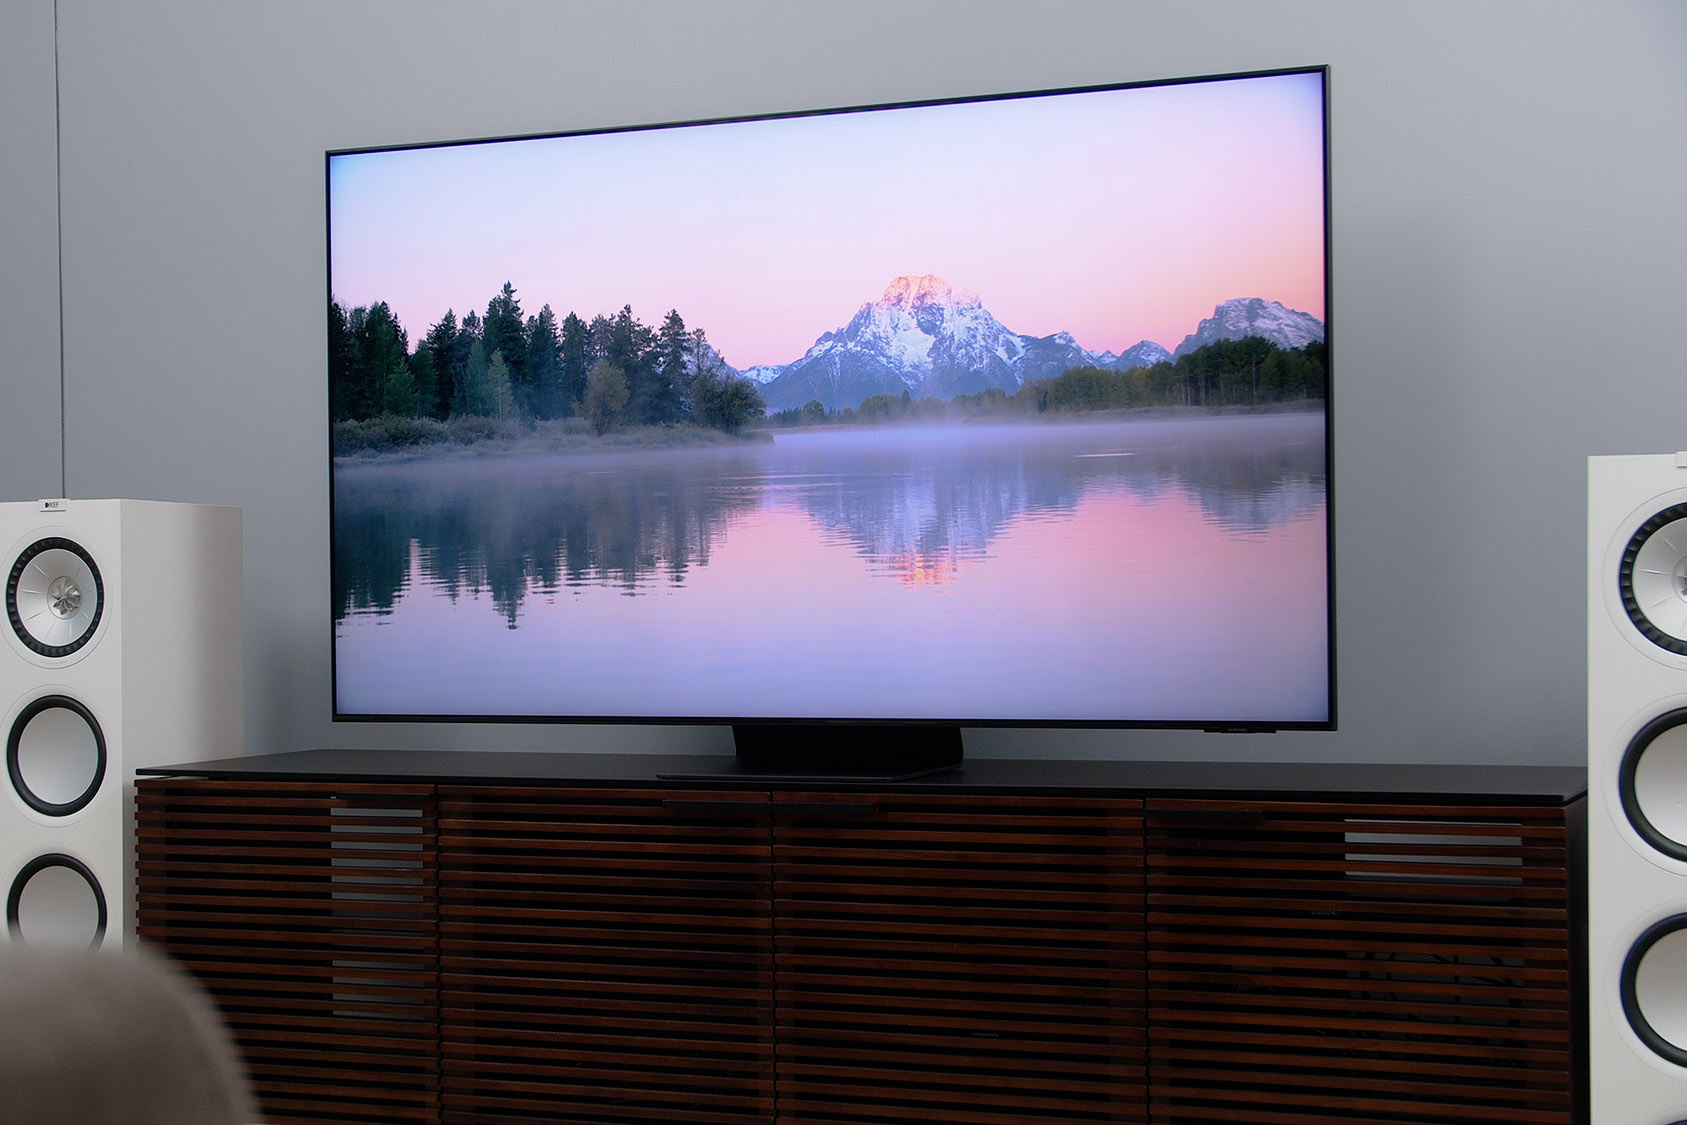 How to Measure a TV so You Buy the Right Size